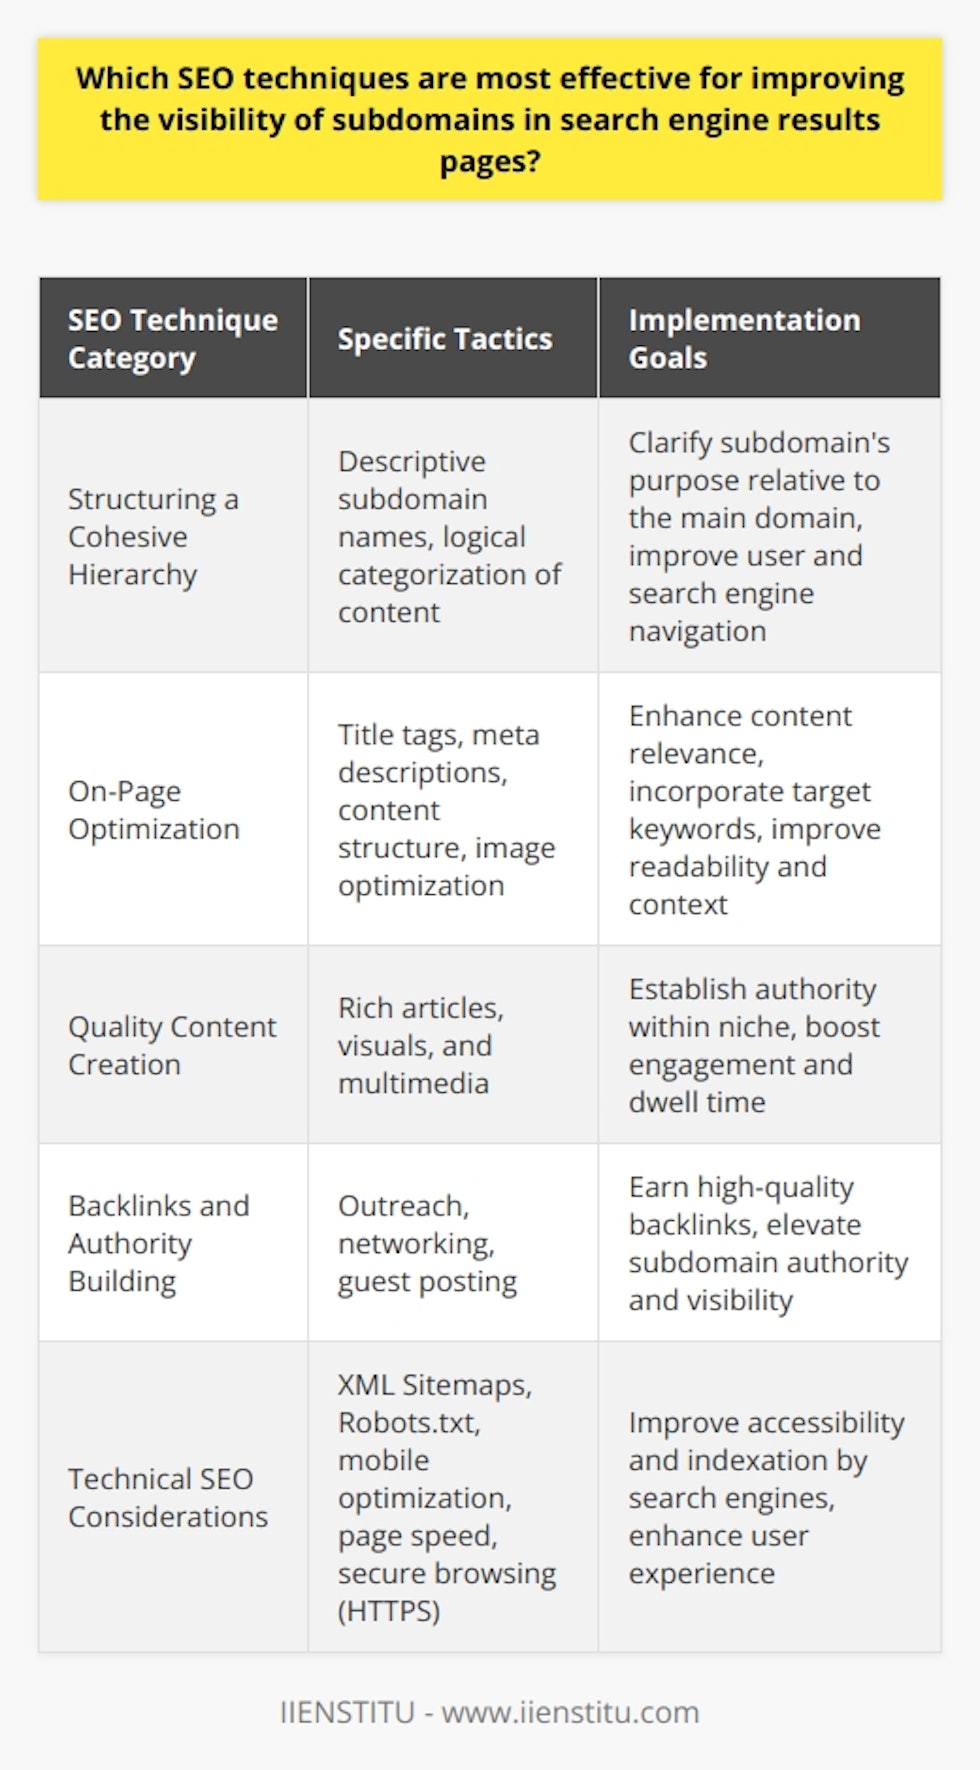 Optimizing subdomains for search engine visibility involves a holistic approach blending meticulous planning, technical finesse, and quality content creation. Such optimization requires a distinct, yet integrative strategy that considers the particular challenges and opportunities presented by subdomains within the online space. Here is a concise guide detailing the most effective SEO techniques designed to improve subdomain visibility in search engine results pages.**Structuring a Cohesive Hierarchy**A well-structured hierarchy is pivotal to clarifying the subdomain's purpose and its relation to the main domain. The logical categorization of content and services across subdomains ensures that search engines and users alike can understand and navigate the structure effortlessly. Priority should be given to intuitive and descriptive subdomain names that reflect the content's purpose, facilitating search engines' grasp of the context and improving SERP rankings.**On-Page Optimization Tactics**On-page optimization remains fundamental, with each subdomain requiring individual attention on content relevance and keyword optimization:- **Unique Title Tags and Meta Descriptions:** Curate compelling and unique title tags and meta descriptions for each subdomain page, incorporating target keywords while ensuring clarity about the page content.- **Headings and Content Structure:** Organize content with clear headings (H1, H2, etc.) that utilize relevant keywords and provide an enjoyable reading experience.- **Image Optimization:** Add descriptive alt tags to images, enhance load times by compressing images, and ensure all visual content is contextually relevant.**Quality Content Creation**The adage content is king holds true for subdomains. Each subdomain should feature high-quality, original, and targeted content that addresses the specific needs of its audience segment:- **Rich, Informative Articles:** Providing comprehensive information that offers real value to readers can establish the subdomain as an authoritative source within its niche.  - **Visuals and Multimedia:** Incorporating charts, videos, and infographics can significantly boost user engagement and encourage higher dwell time on the site, signaling quality to search engines.**Backlinks and Authority Building**Earning high-quality backlinks is crucial for subdomains as it signifies to search engines that the content is valuable and trustworthy:- **Outreach and Networking:** Forming partnerships and engaging with thought leaders can lead to natural backlink opportunities that enhance the subdomain's visibility.- **Guest Posting:** Authoritative articles on respected external sites with a link back to the subdomain can drive traffic and elevate domain authority.**Technical SEO Considerations**Technical SEO ensures that search engines can access and index your subdomain content effectively:- **XML Sitemaps and Robots.txt:** These tools should be configured to guide search engine crawlers through your subdomain's content, making sure all valuable pages are indexed.- **Mobile Optimization:** With mobile-first indexing, ensuring that subdomains are responsive and mobile-friendly is a necessity.- **Page Speed:** Optimize loading times as SERPs favor sites that provide a swift user experience.- **Secure Browsing:** Implement HTTPS to provide a safe browsing experience, which is a known ranking factor.In implementing these strategies, it is critical to monitor the subdomain's performance and adjust tactics as needed. Continuous analysis using analytics tools can offer insights into the effectiveness of the employed SEO techniques, allowing for data-driven decisions to further refine and enhance subdomain visibility on SERPs.In essence, subdomains require a dedicated SEO approach, tailored to their unique position within the greater domain structure. By emphasizing a strategic hierarchy, specialized on-page elements, high-quality content, authoritative backlinks, and robust technical foundations, subdomains can achieve improved visibility and performance in search engine results pages.